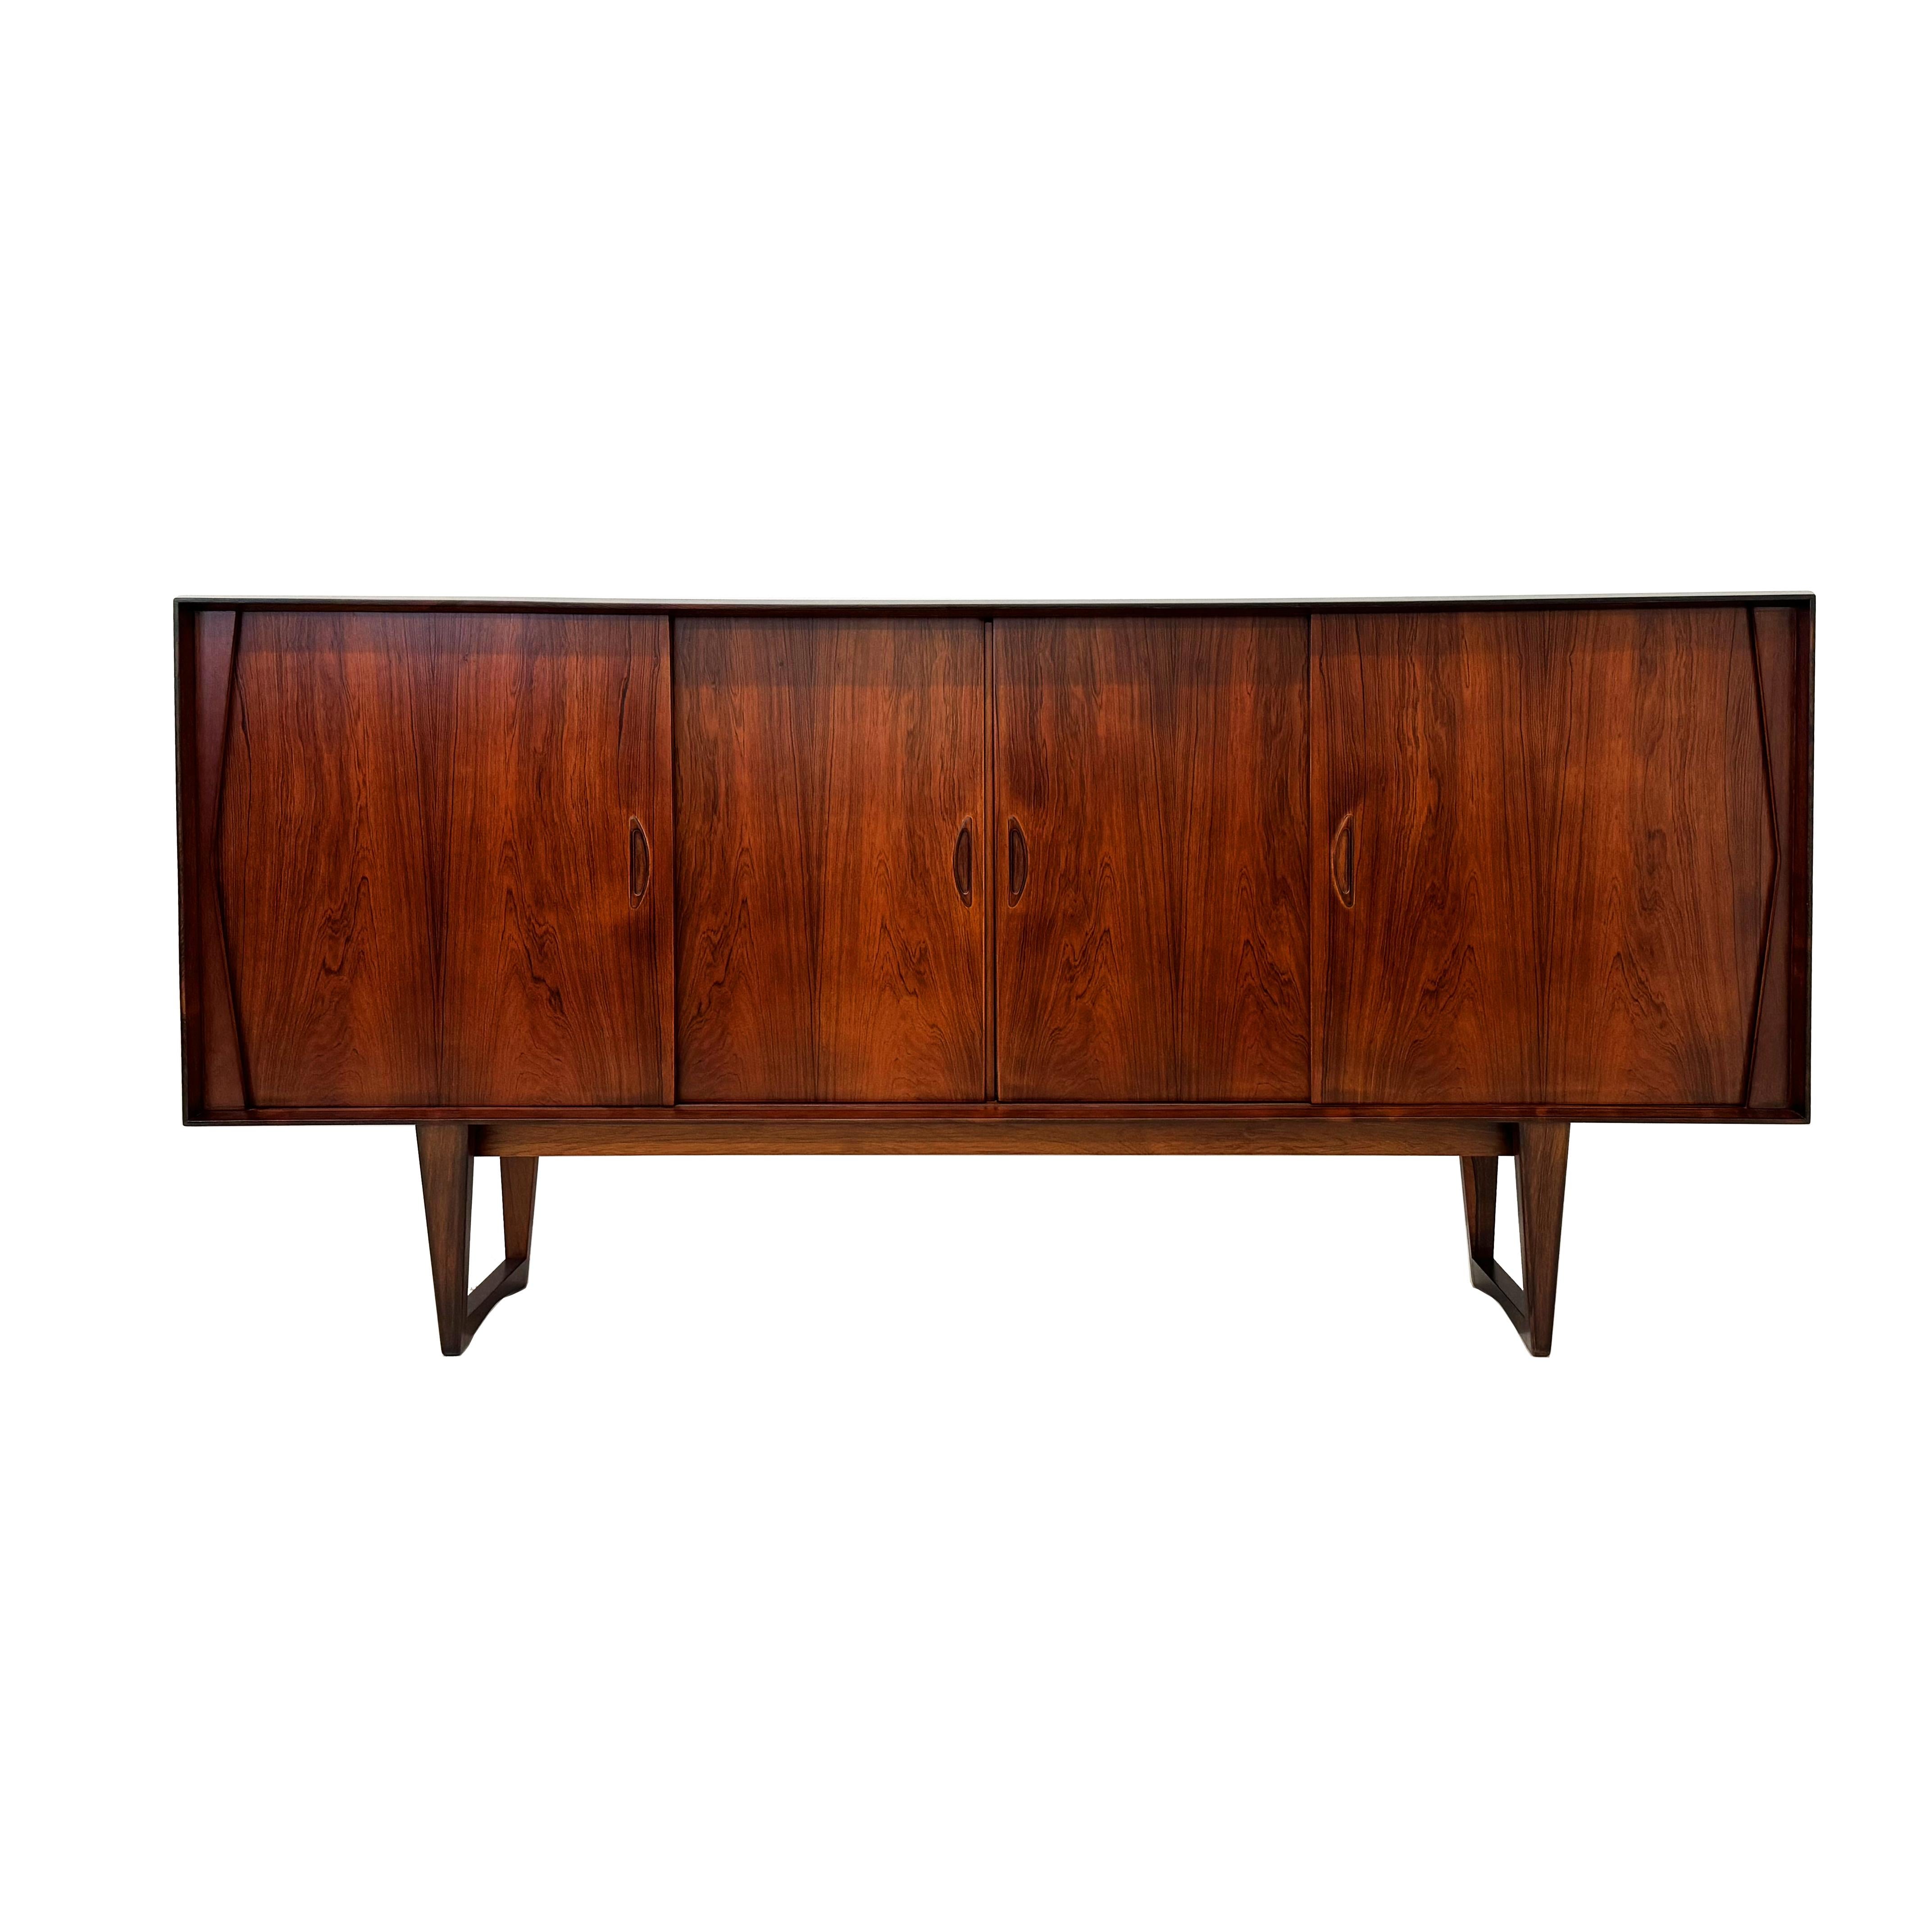 Mid-Century Brazilian Rosewood sideboard with dynamic book-matched grain on four sliding doors. Nice detailed legs. Shelves, three drawers and a bar with mirror inside. Adjustable shelves. Light automatically turns on when center doors open, to